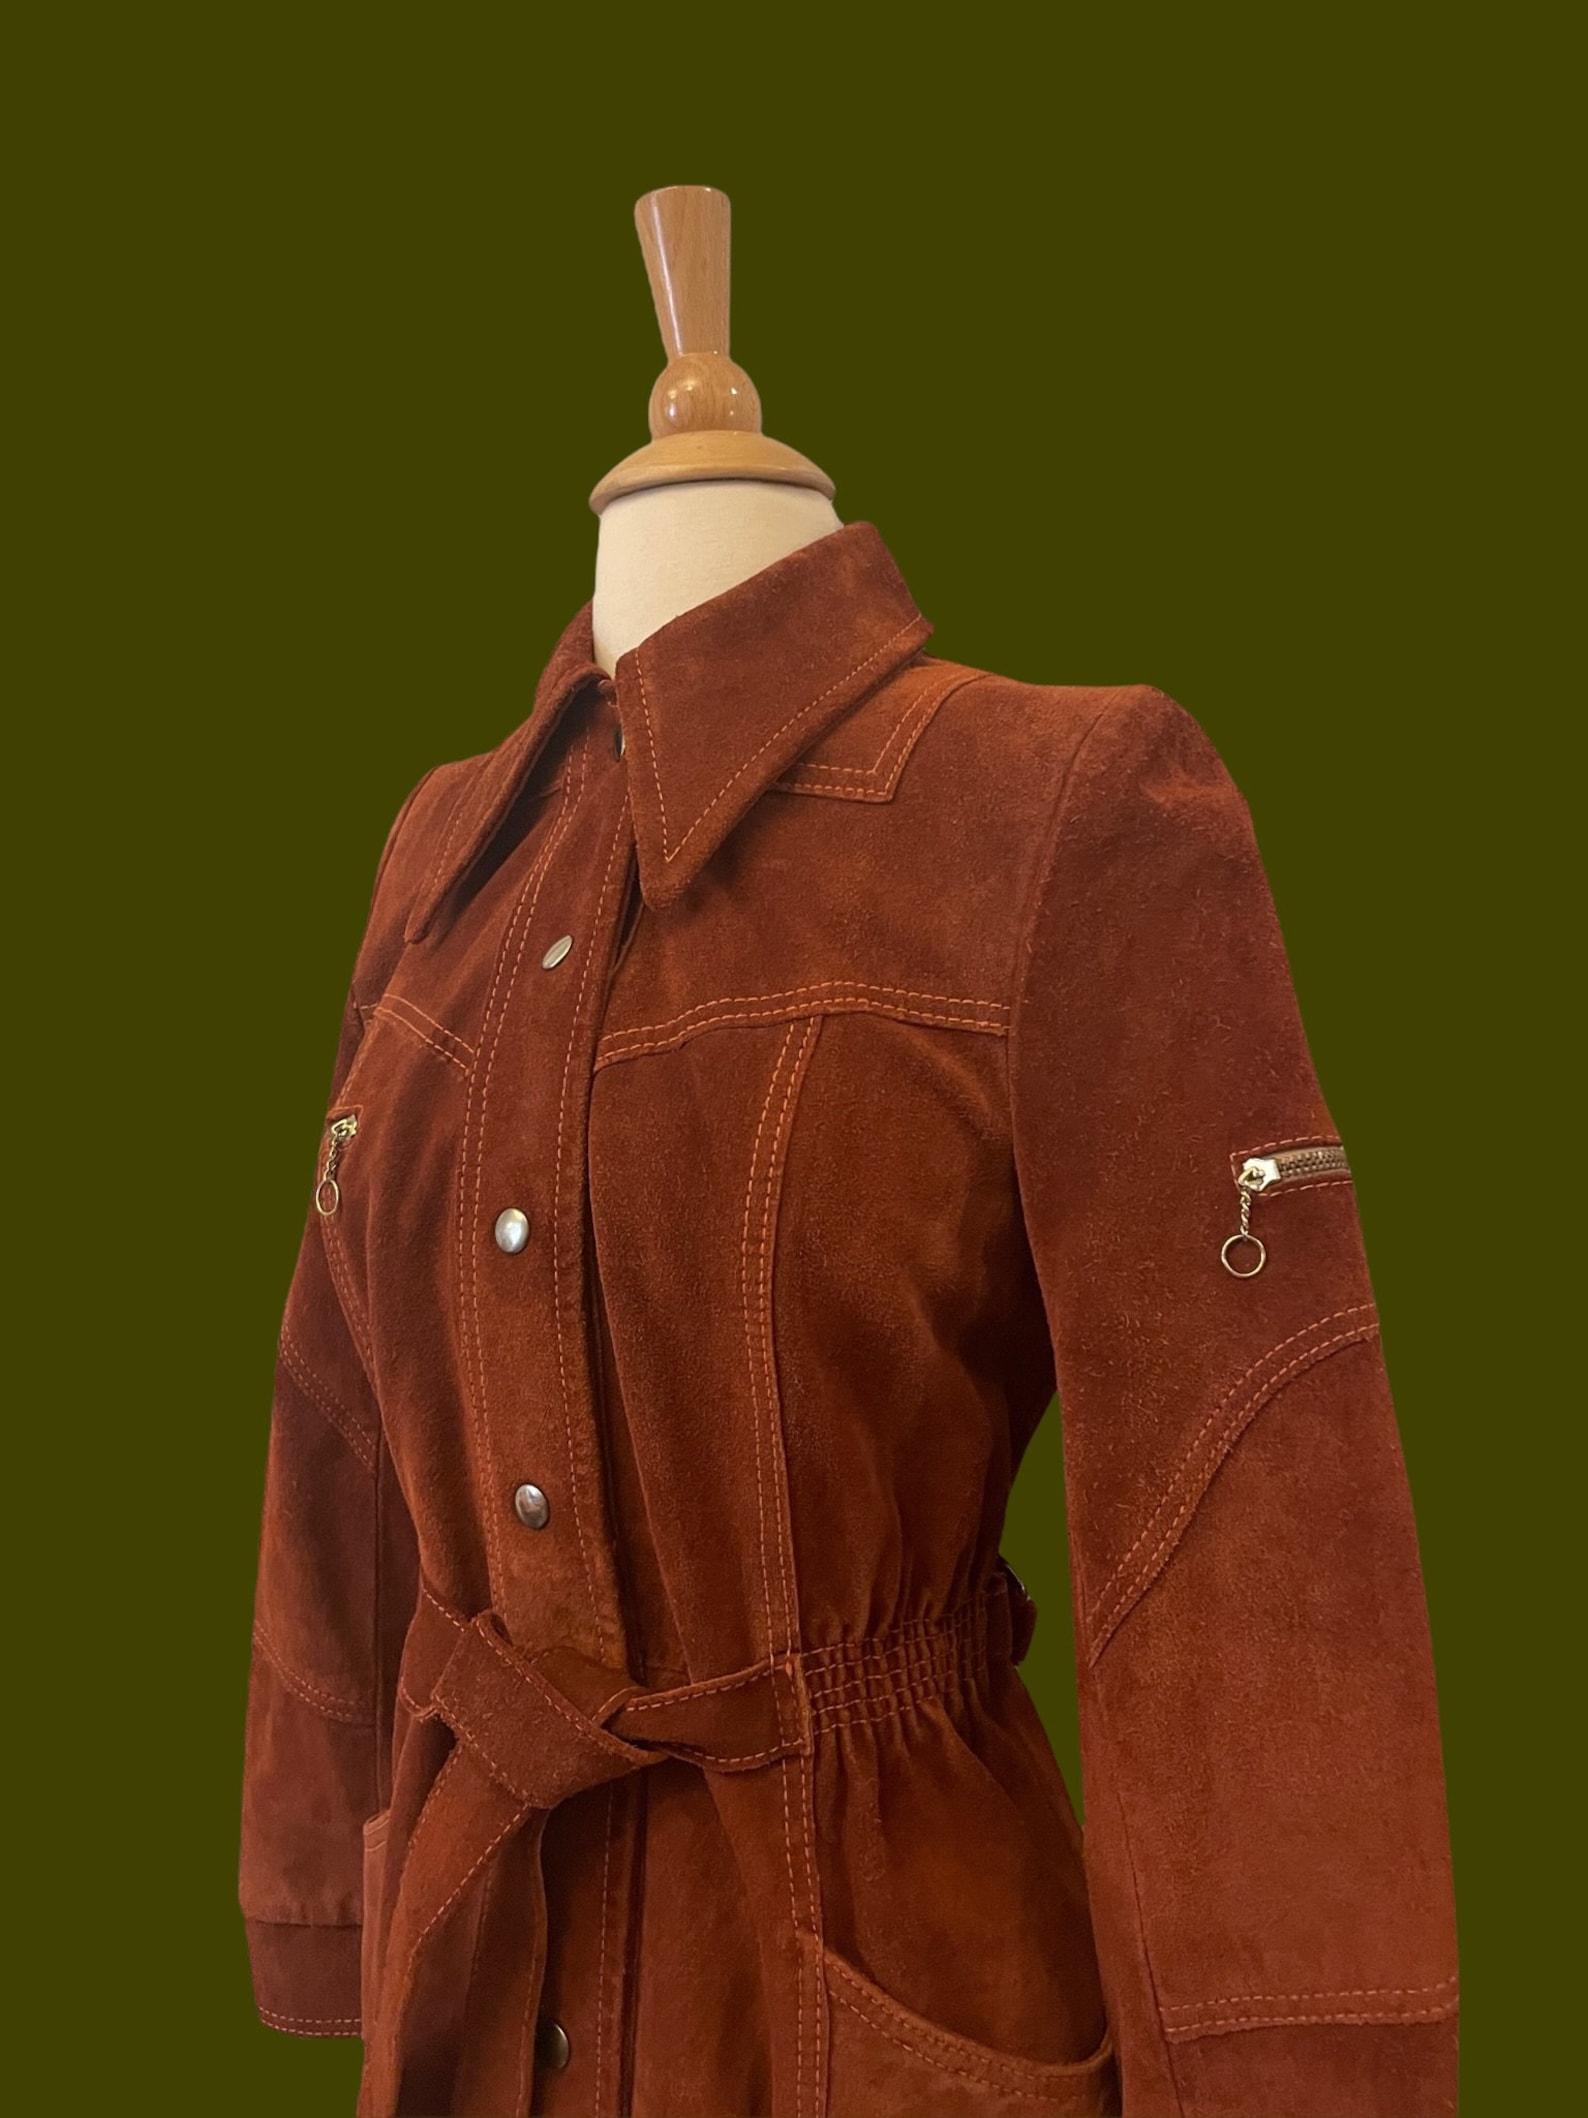 Rust Brown Suede Jacket, Circa 1970s For Sale 1